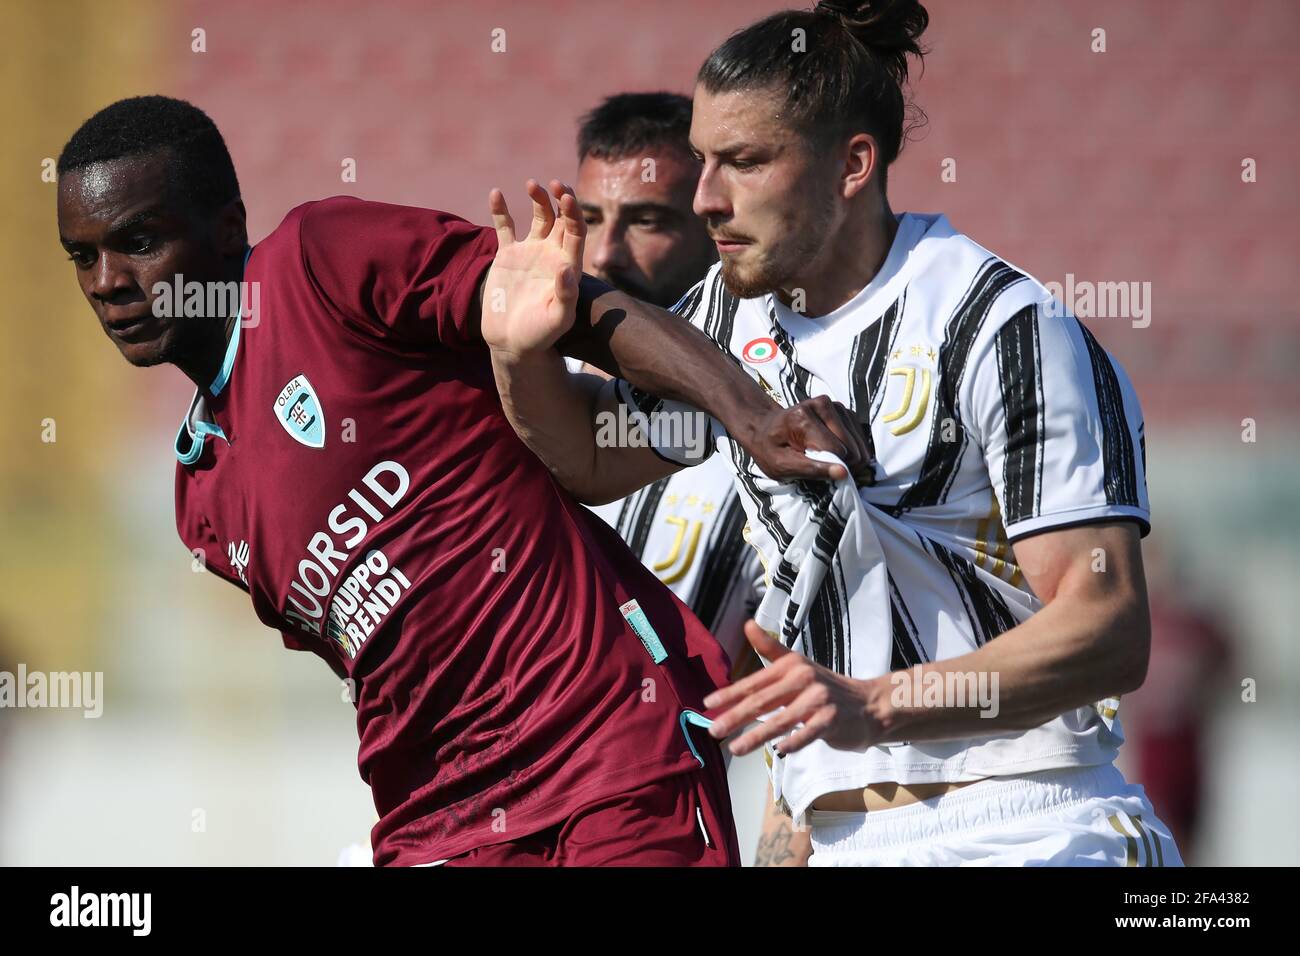 Alessandria, Italy. 22nd Apr, 2021. Radu Dragusin of Juventus tussles with  King Udoh of Olbia Calcio during the Serie C match at Stadio Giuseppe  Moccagatta - Alessandria. Picture credit should read: Jonathan